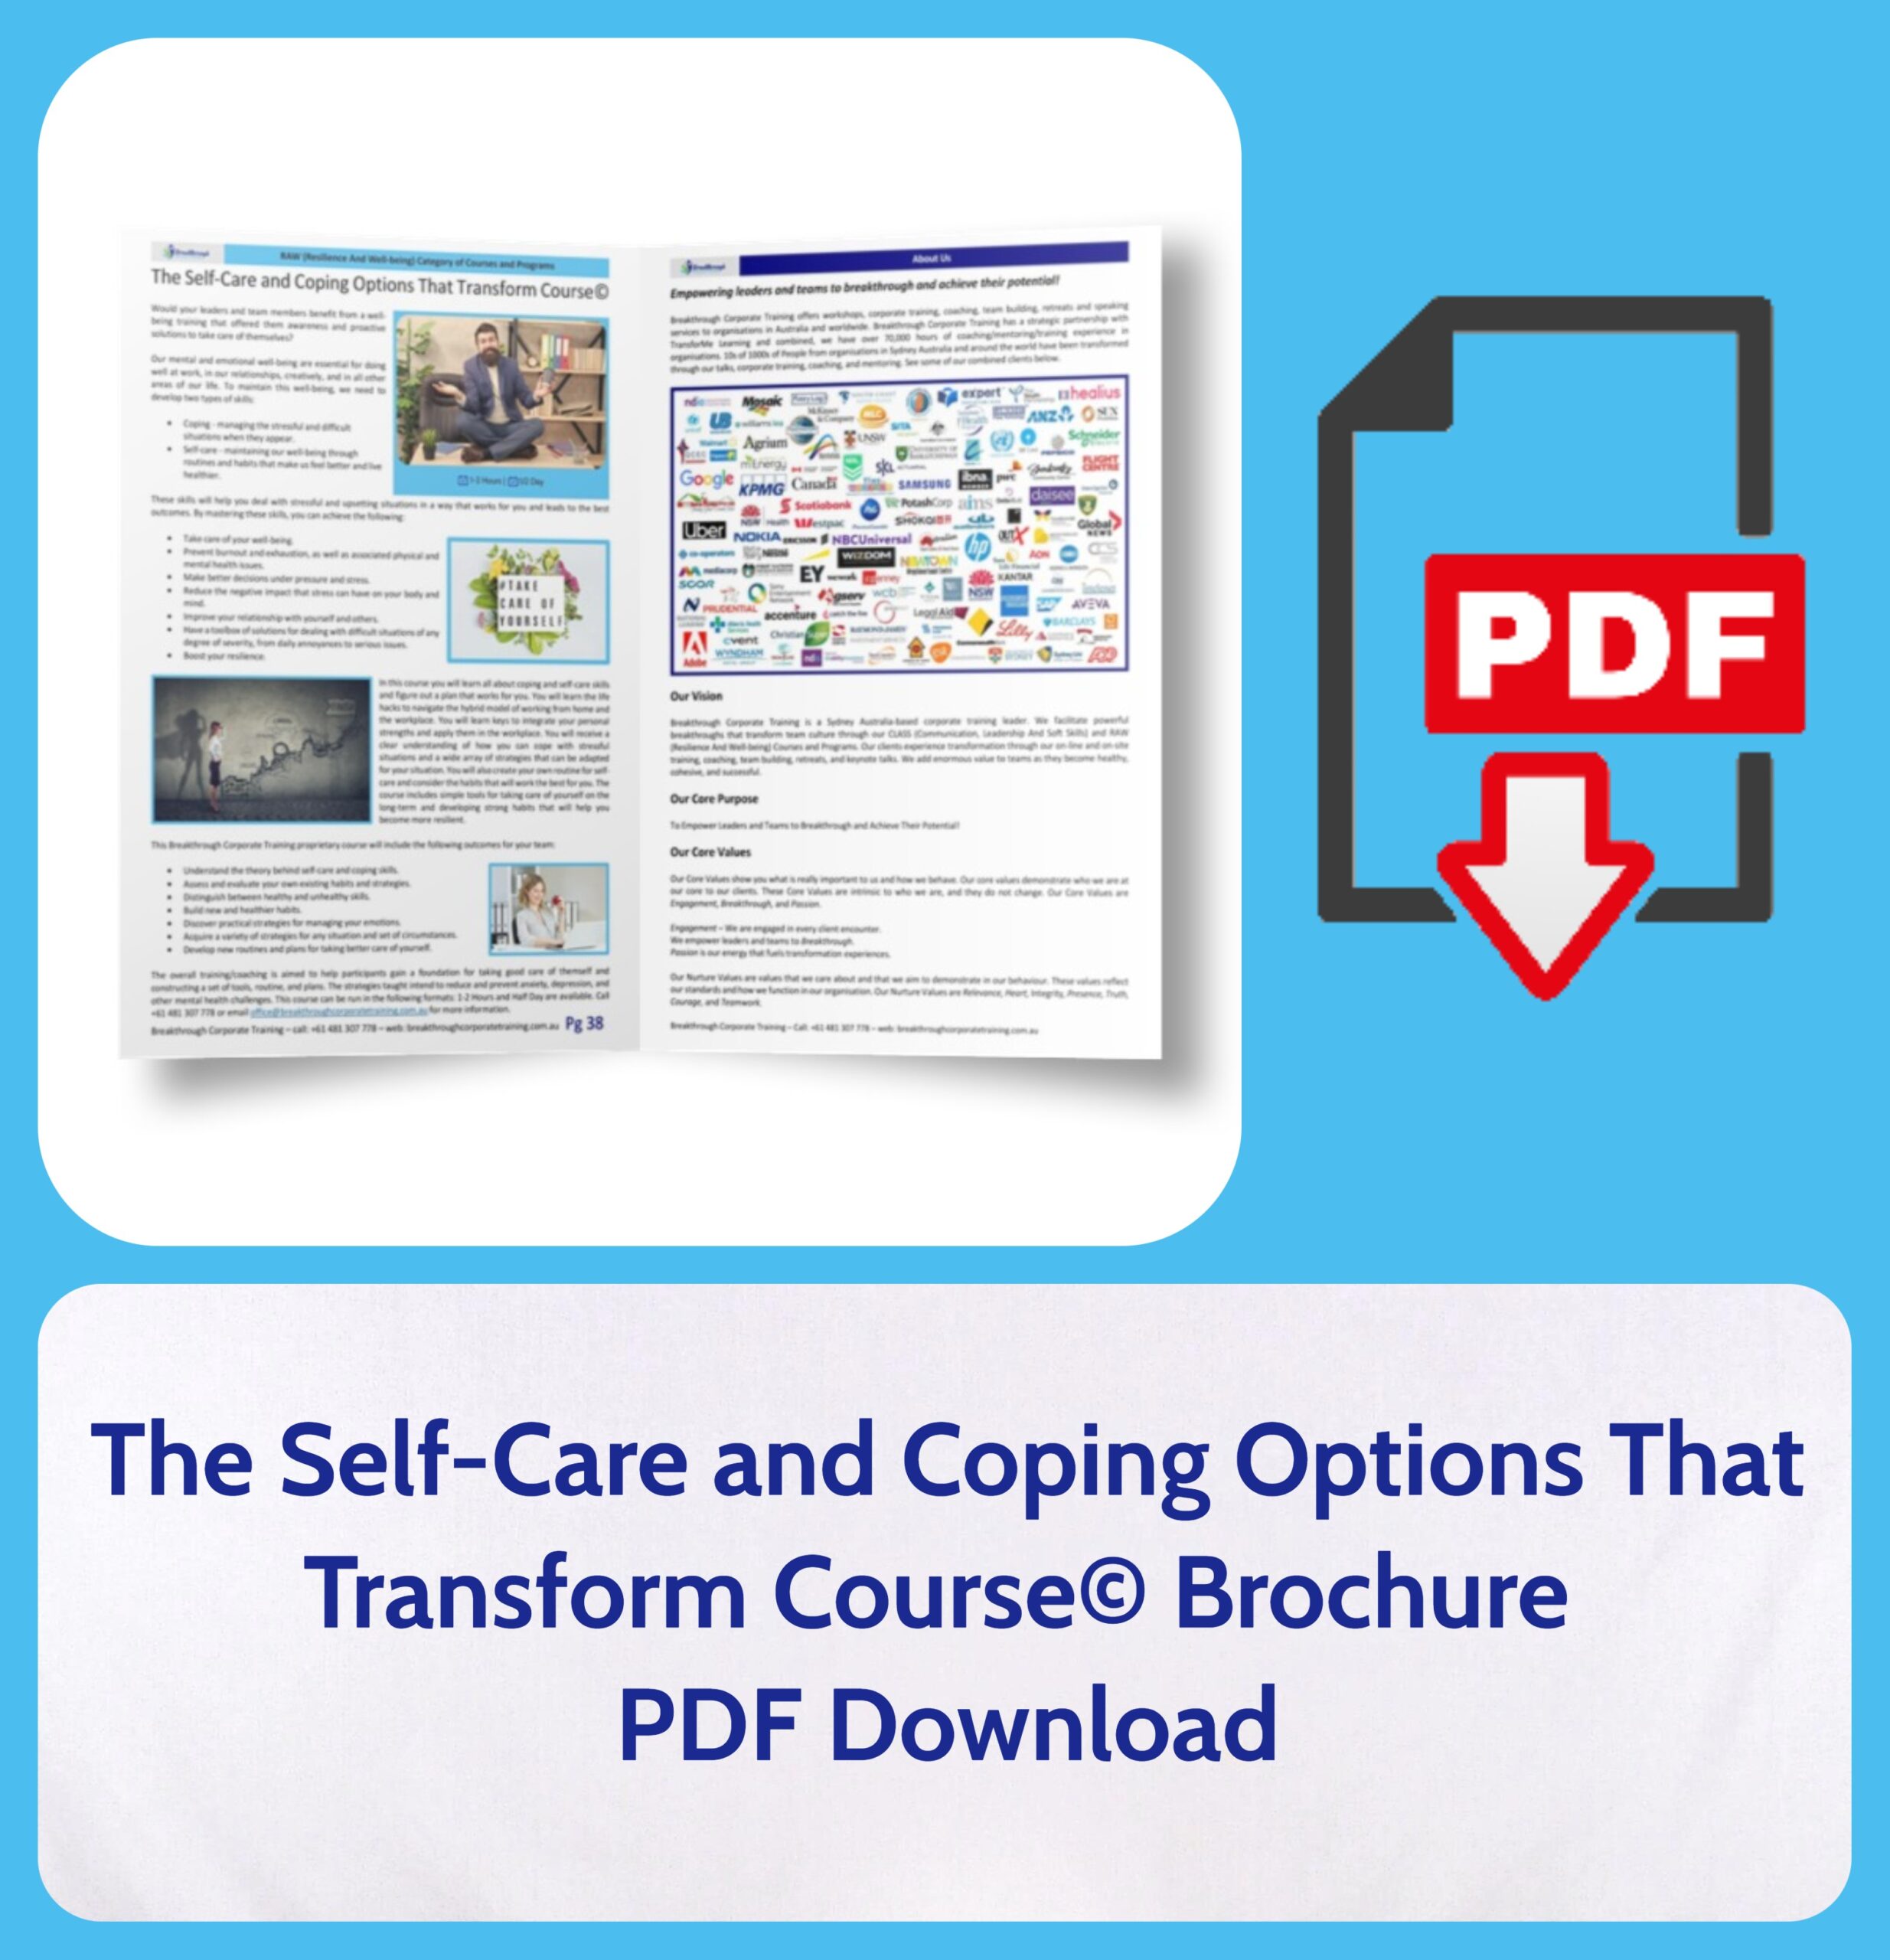 The Self-Care and Coping Options That Transform Course